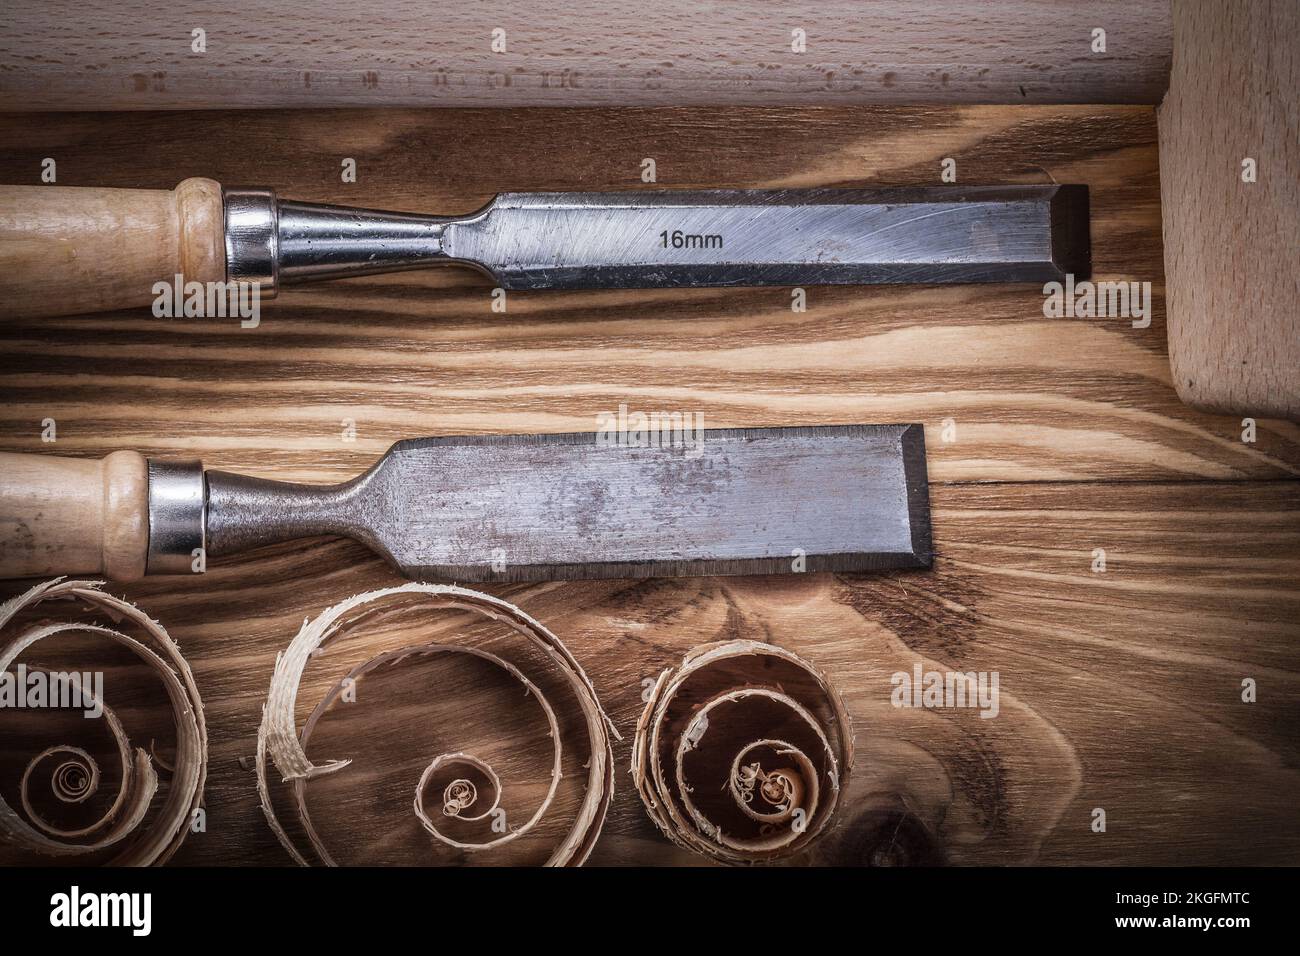 Wooden hammer flat chisels planning chips on vintage wood board construction concept. Stock Photo